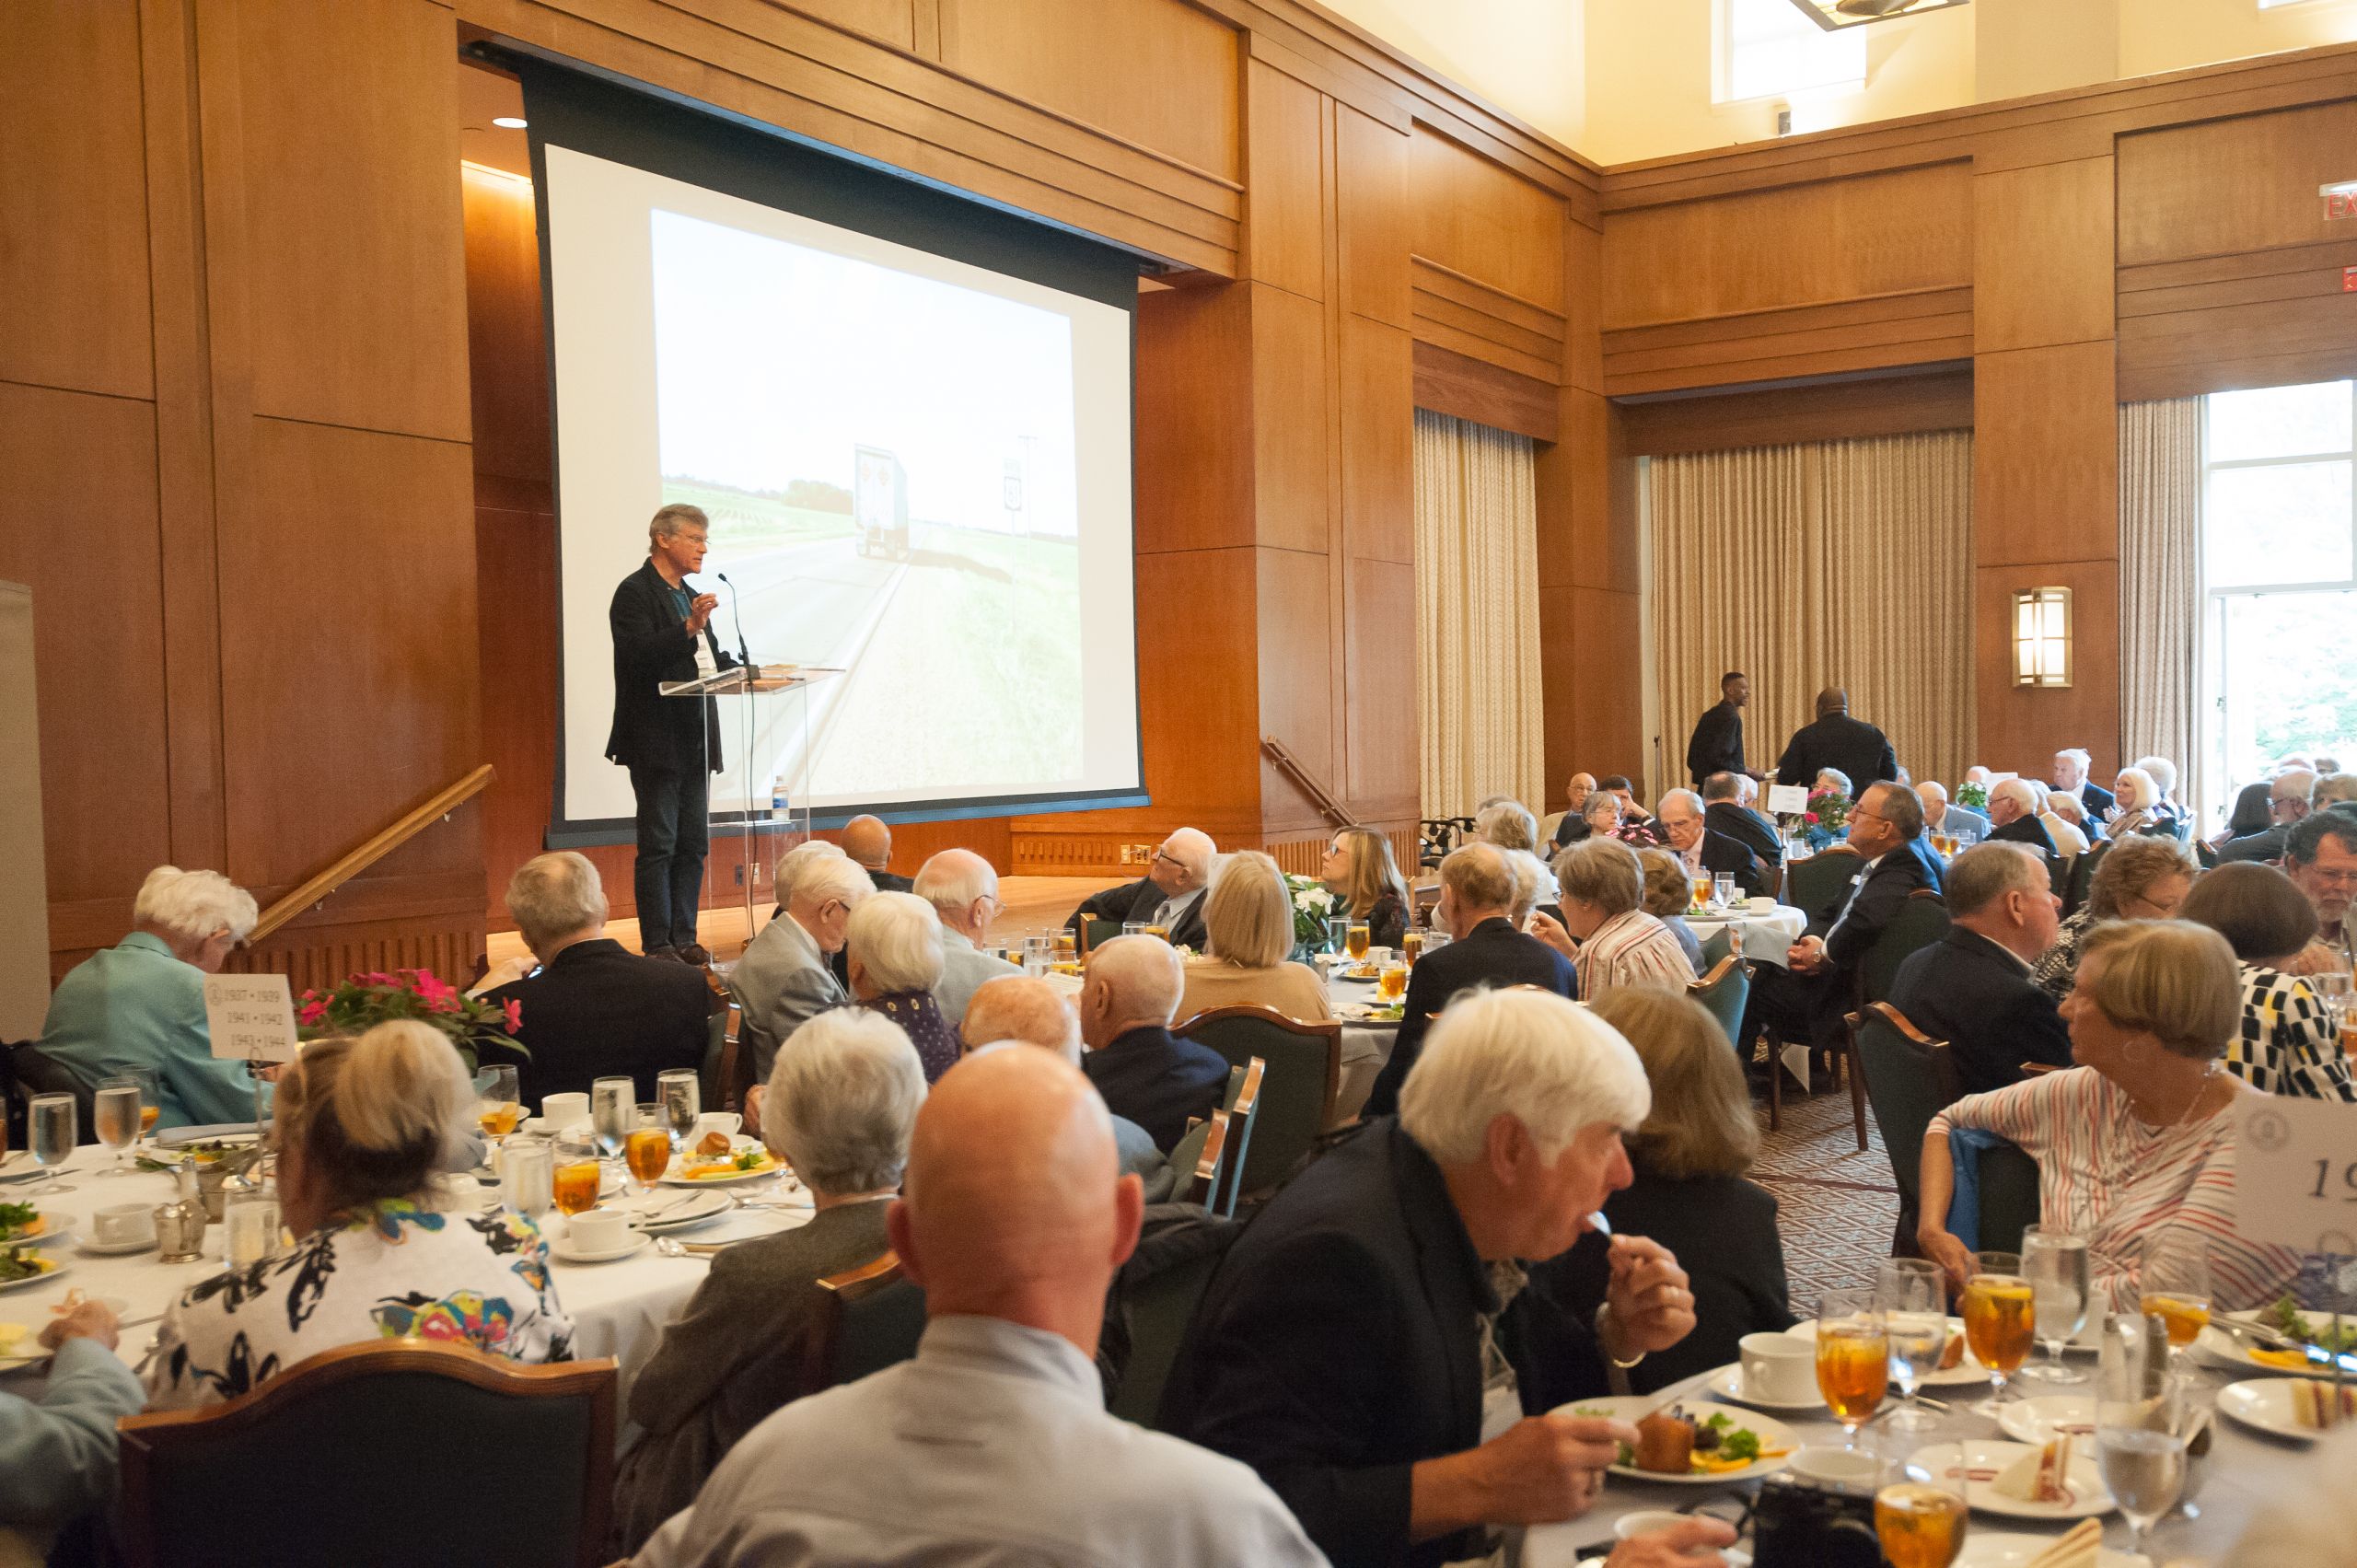 William Ferris, the Joel R. Williamson Eminent Professor of history and senior associate director of the Center for Study of the American South at UNC, was the featured speaker at the luncheon. (Photo by Shane Snider)